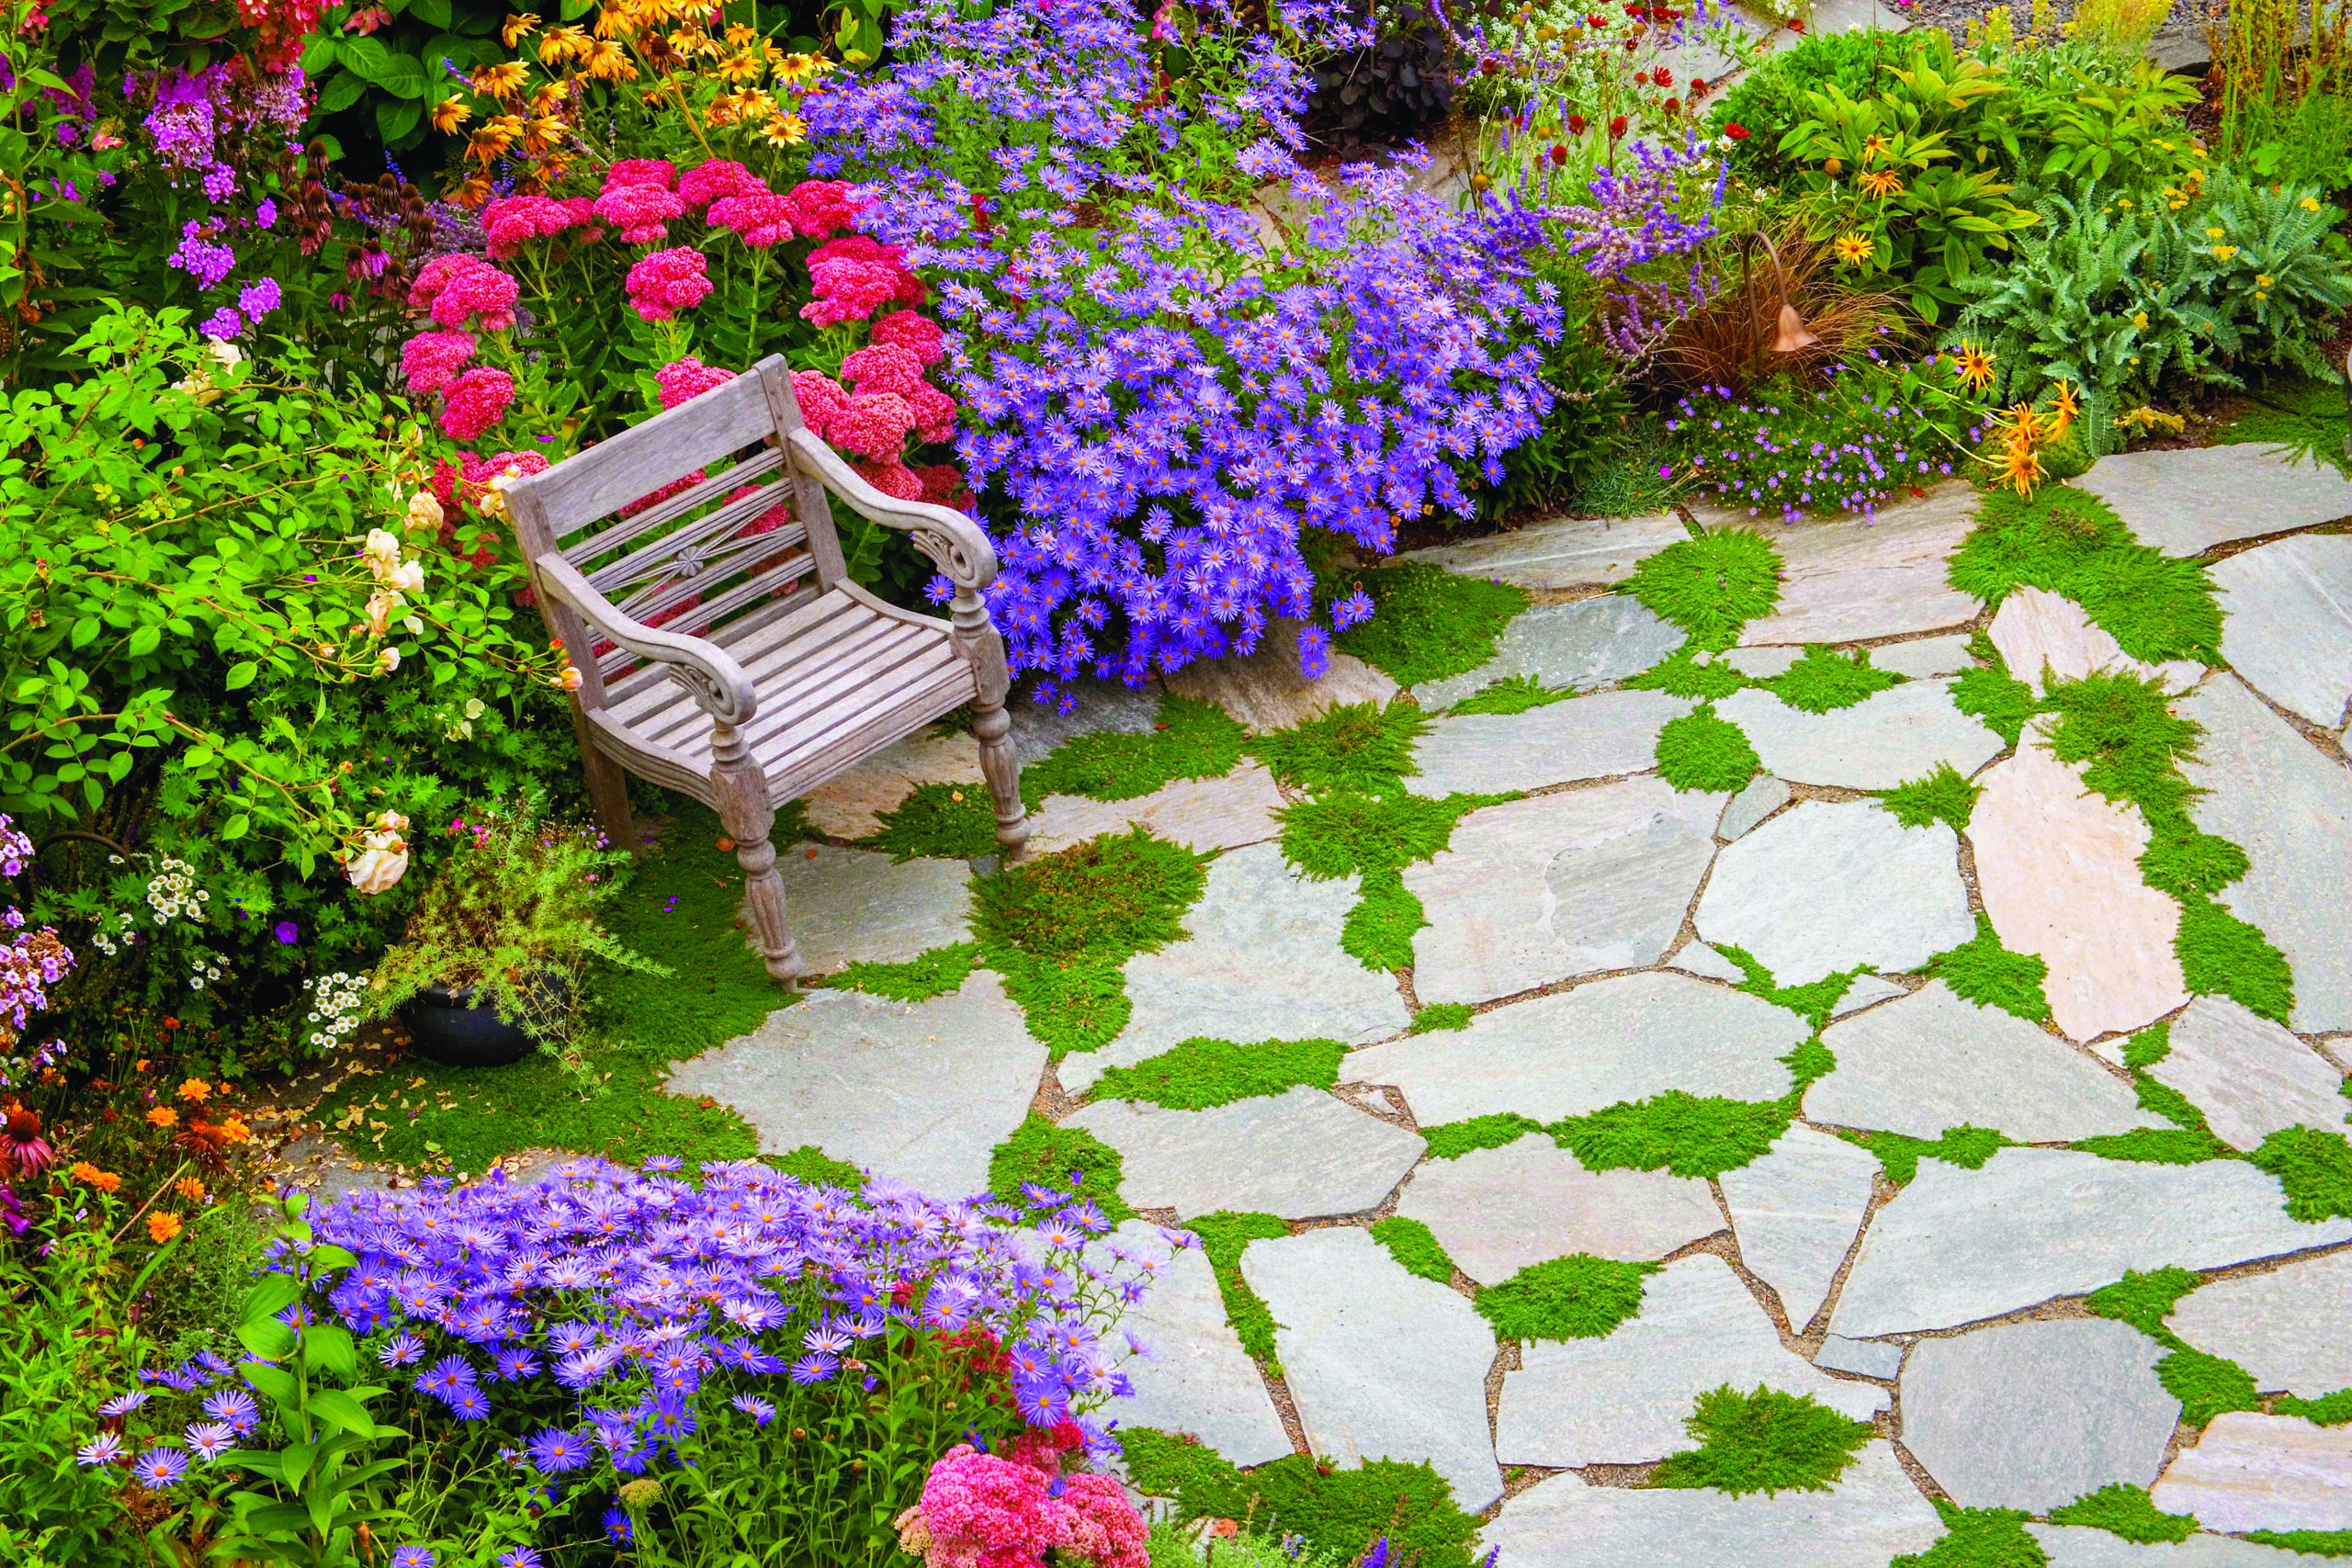 Enjoy your yard even more by adding a patio